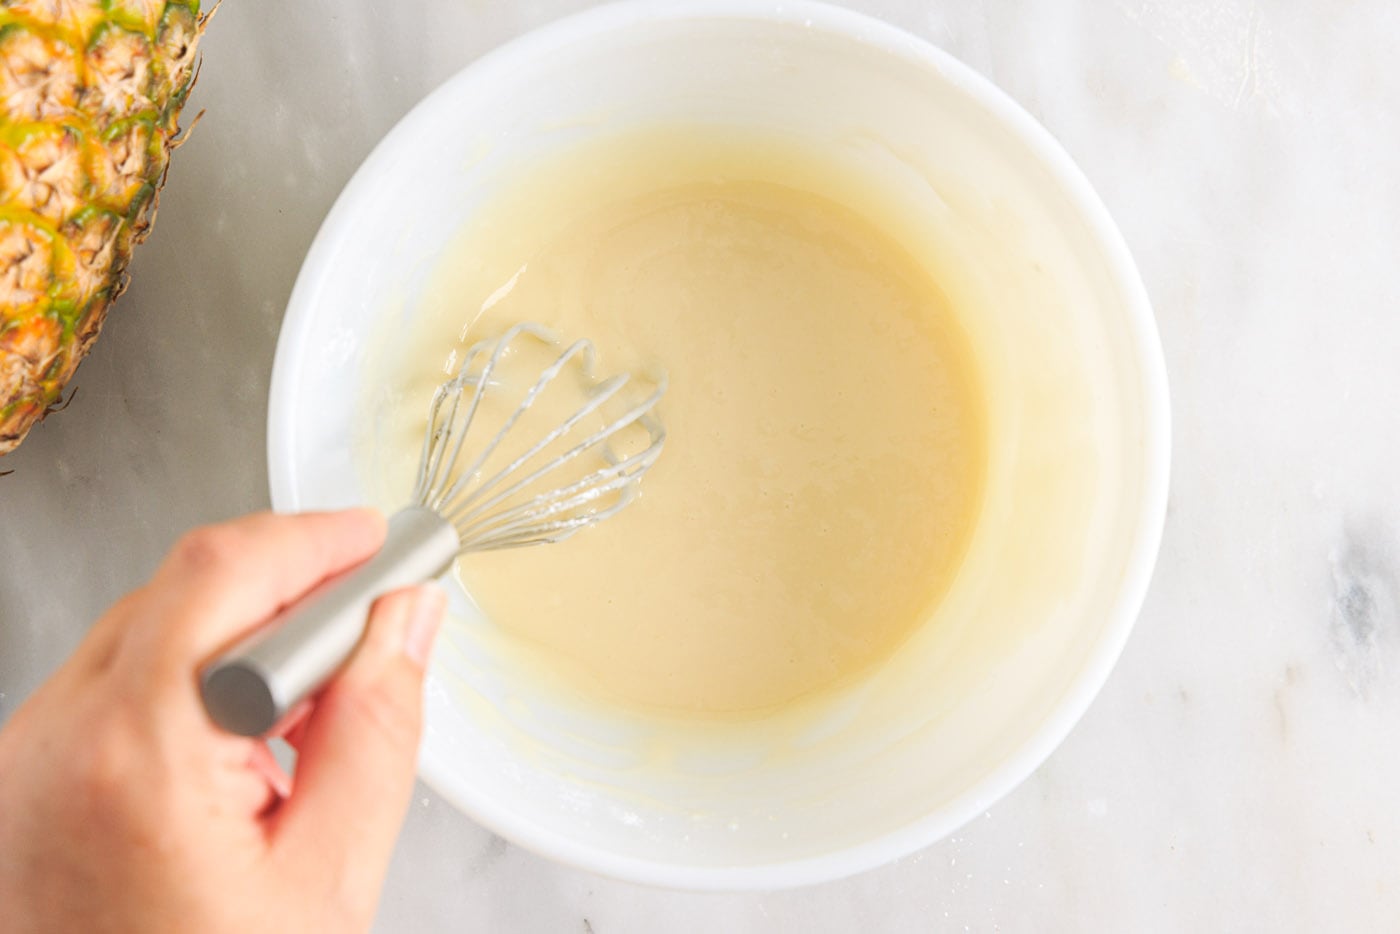 whisking pineapple glaze in a bowl